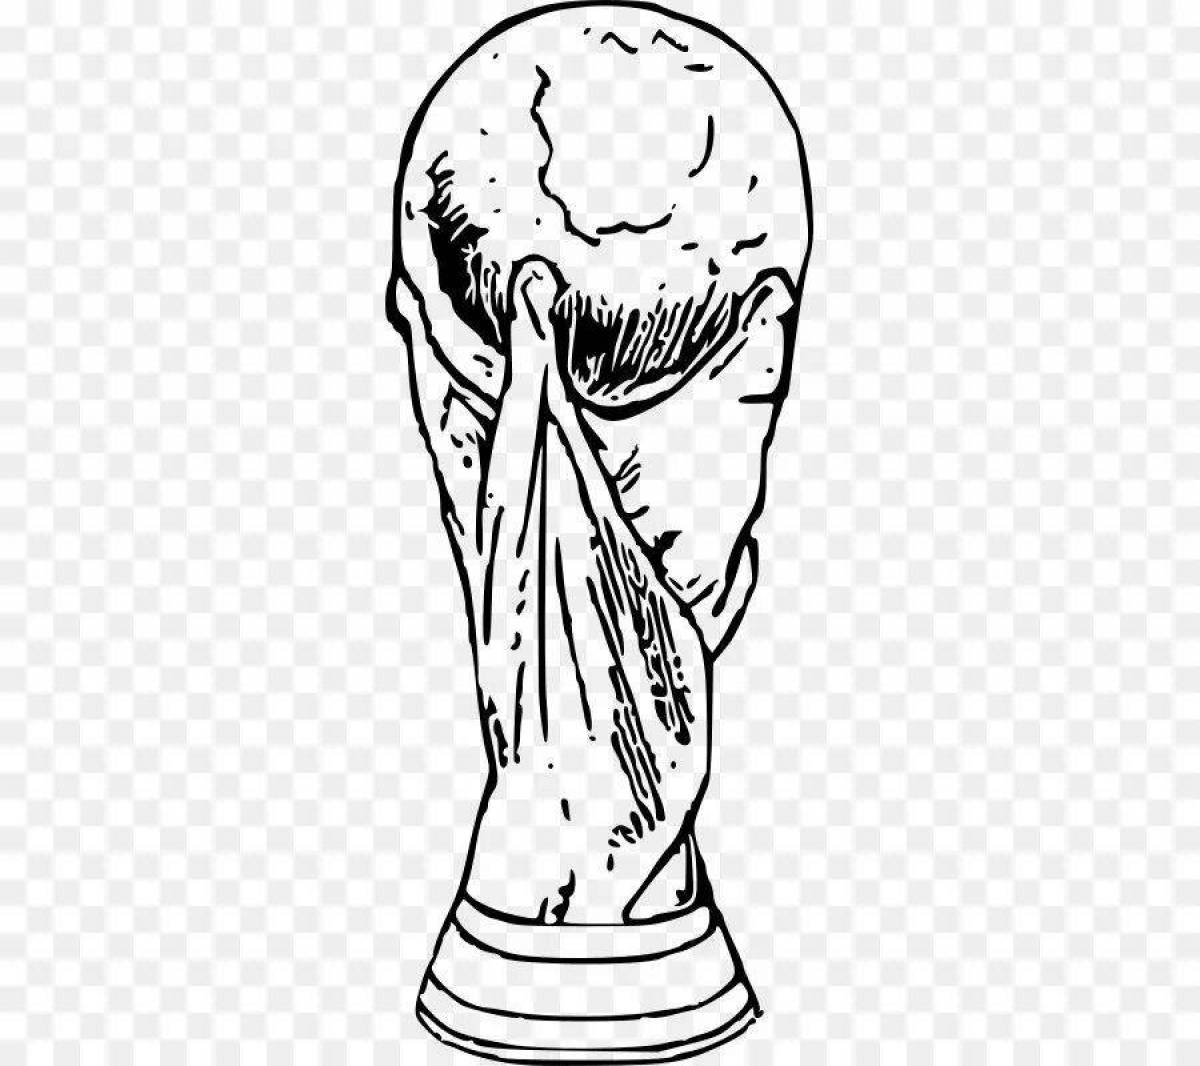 Football World Cup coloring book